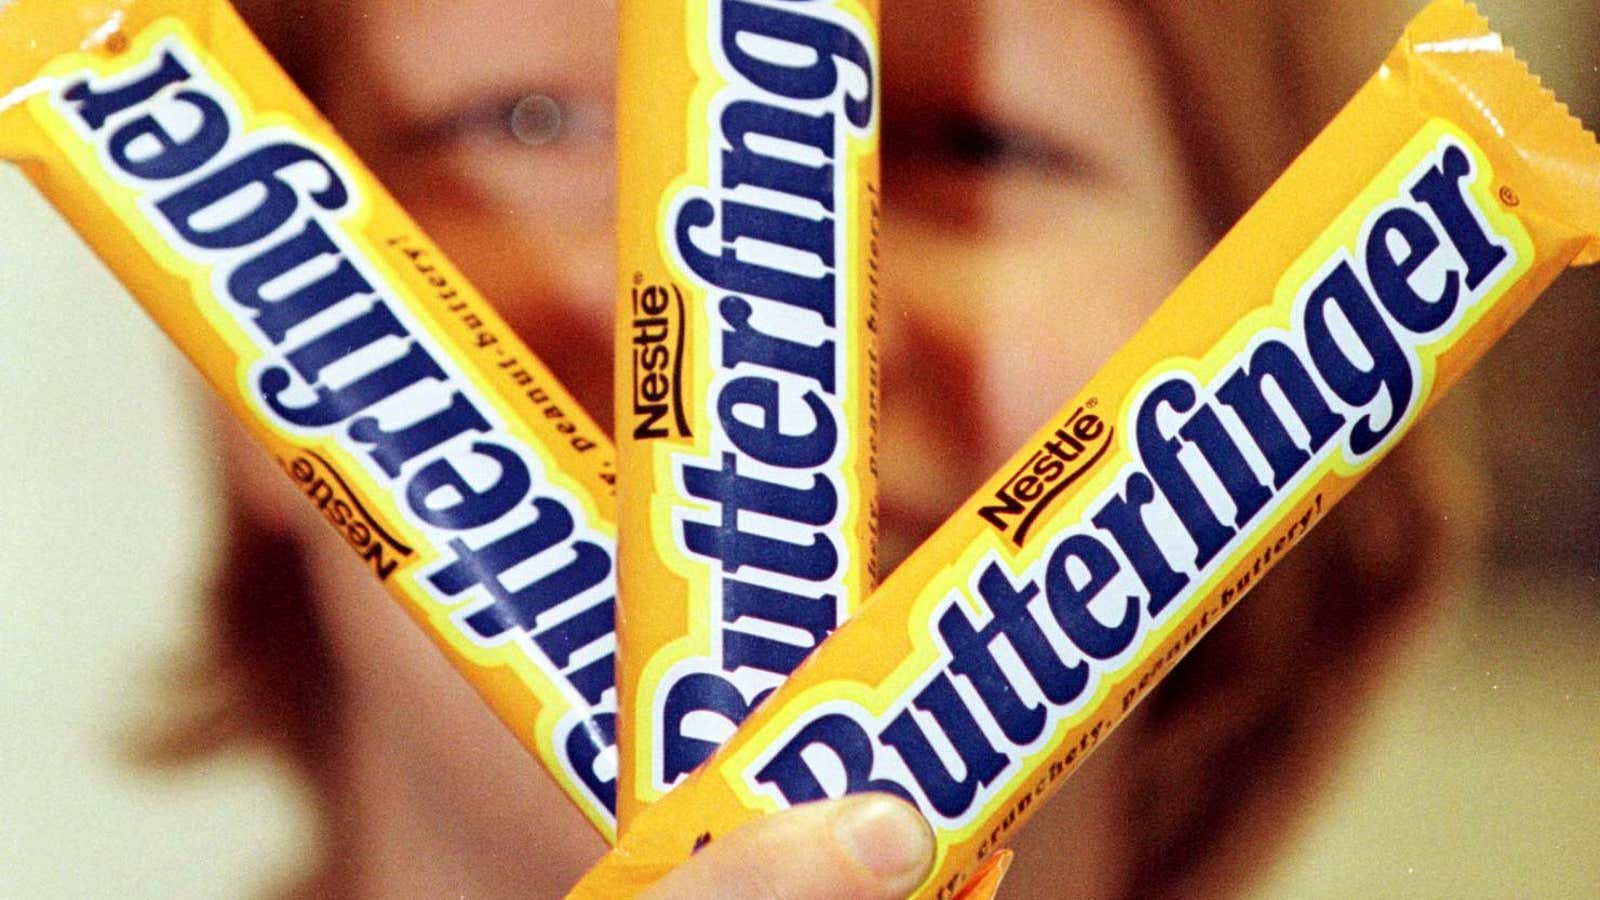 Vintage Butterfinger wrappers, circa 1999.